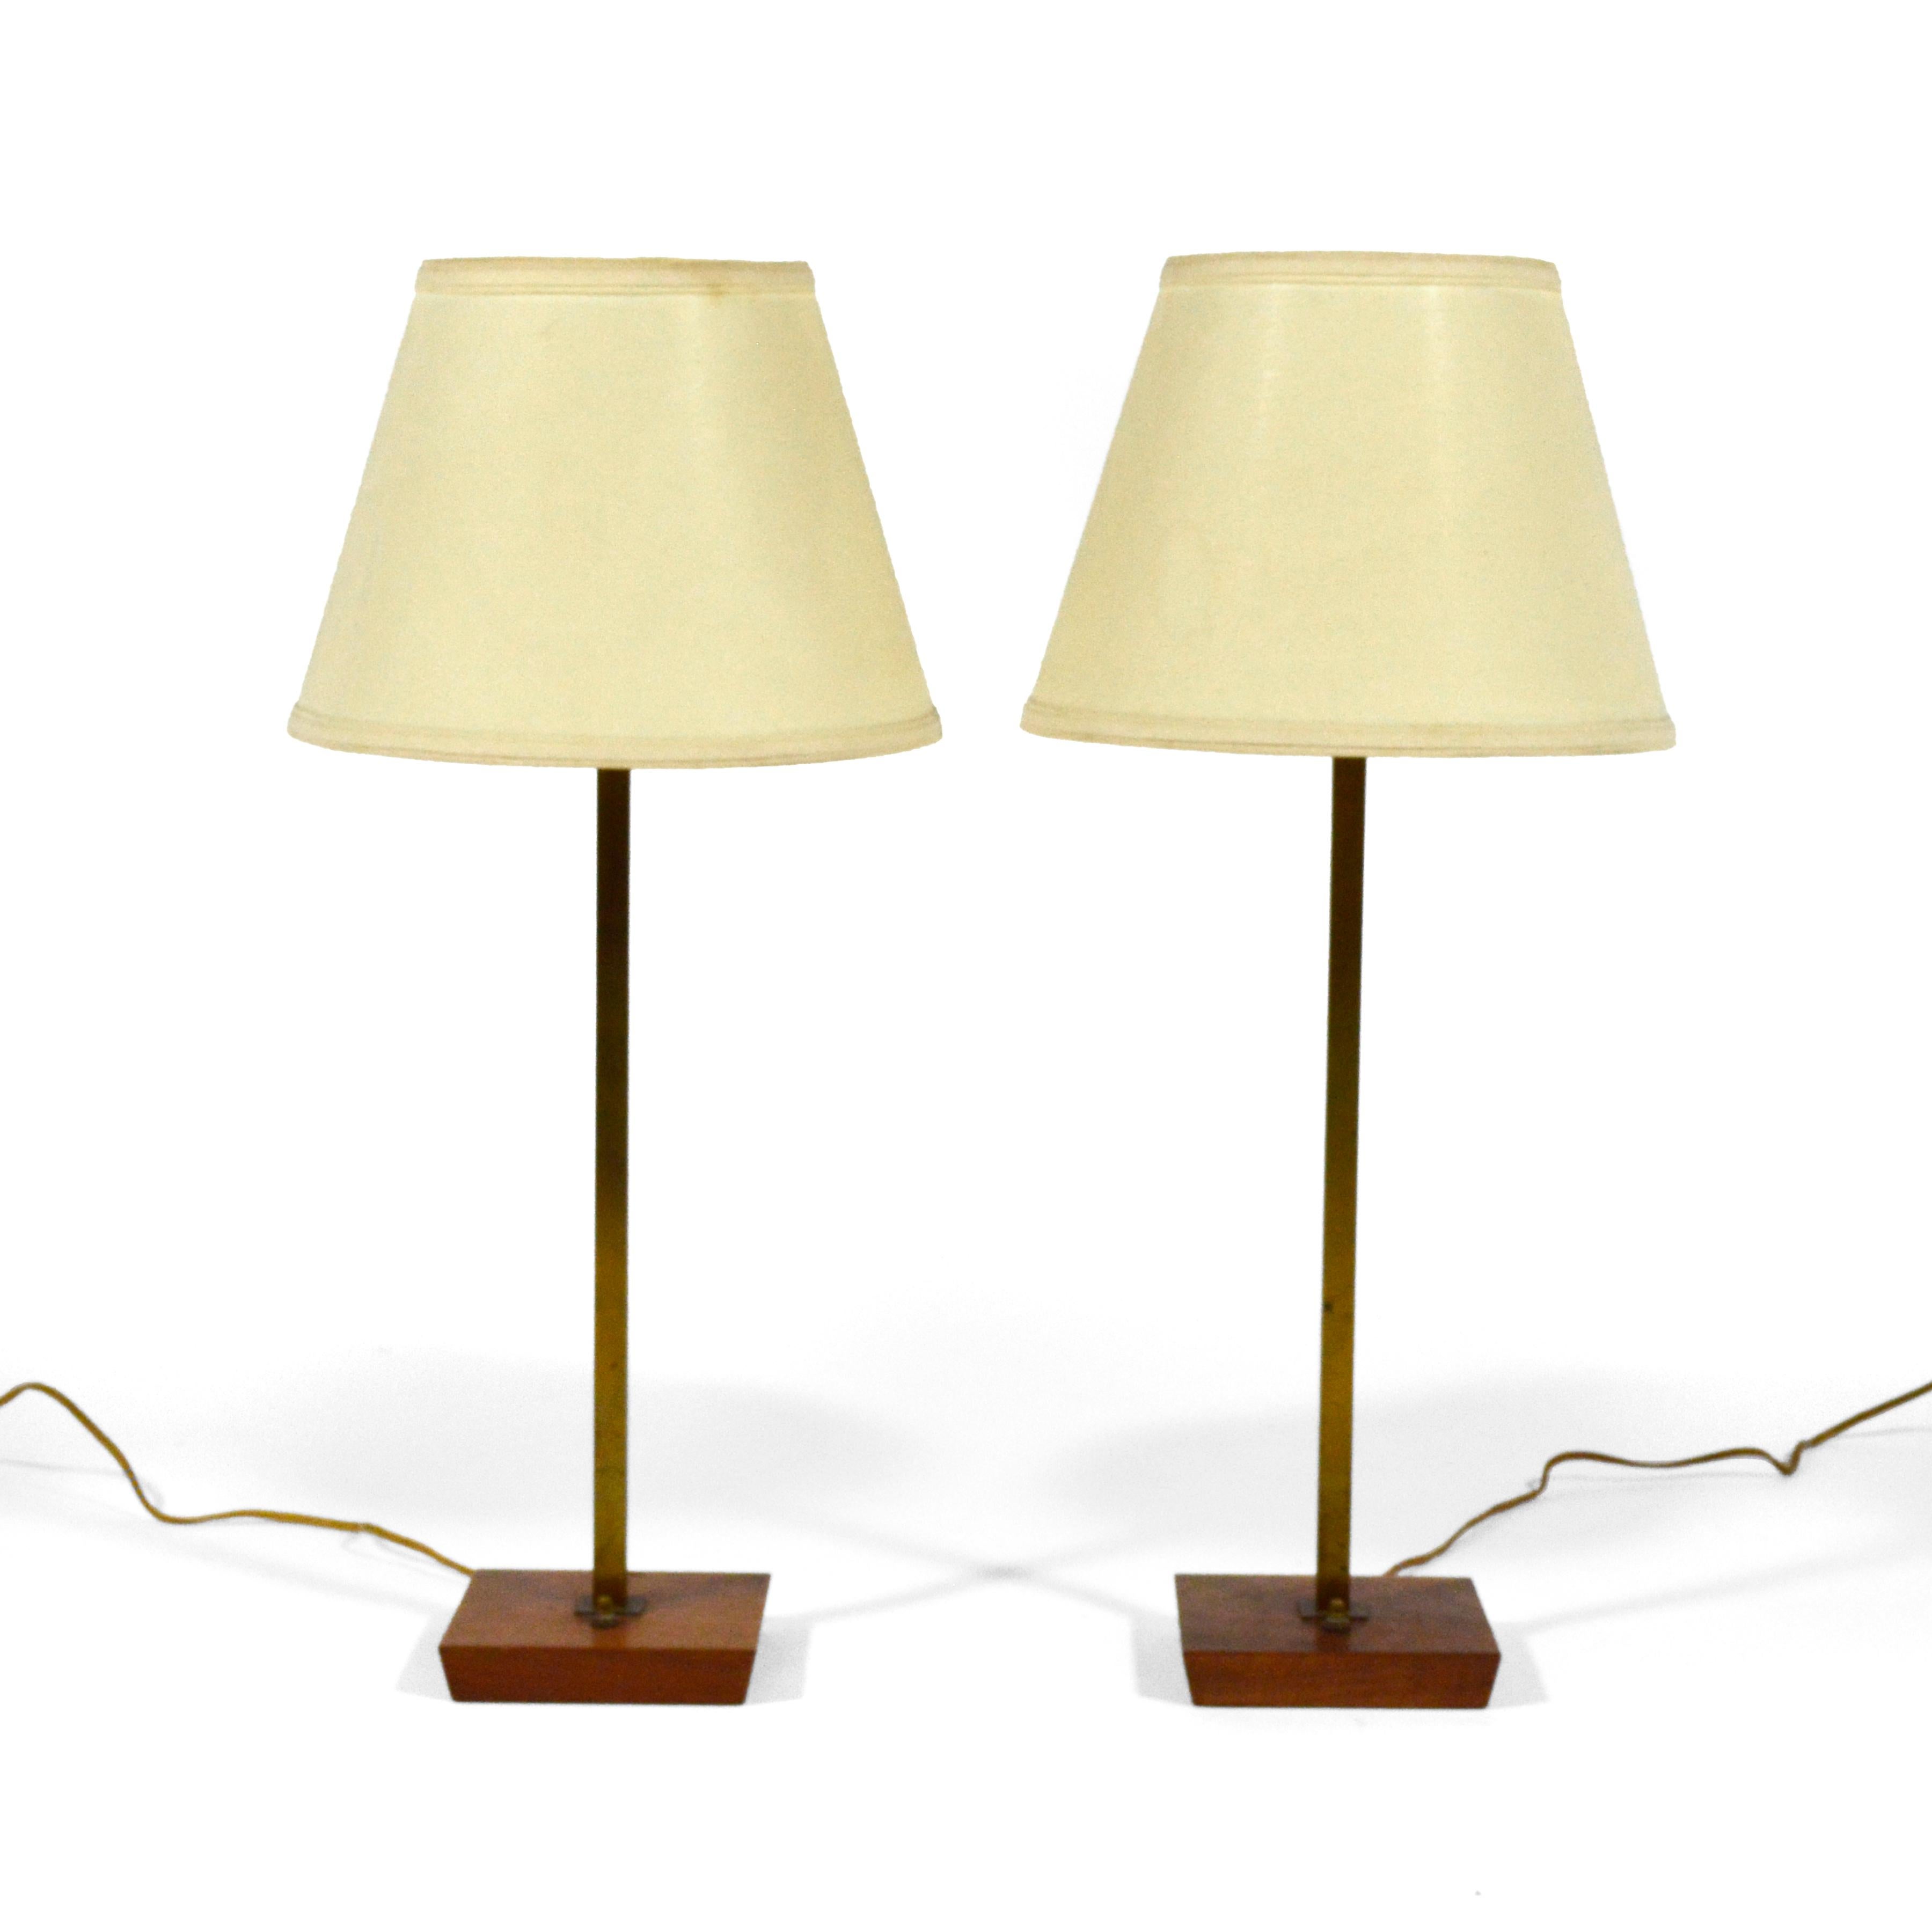 This lovely design with a walnut base supporting a neck of square stock brass has a refined simplicity reminiscent of Paul McCobb's work. The lamp has aquired a beautiful rich patina  from years of age and use.

Designated model N5958 the base is 6